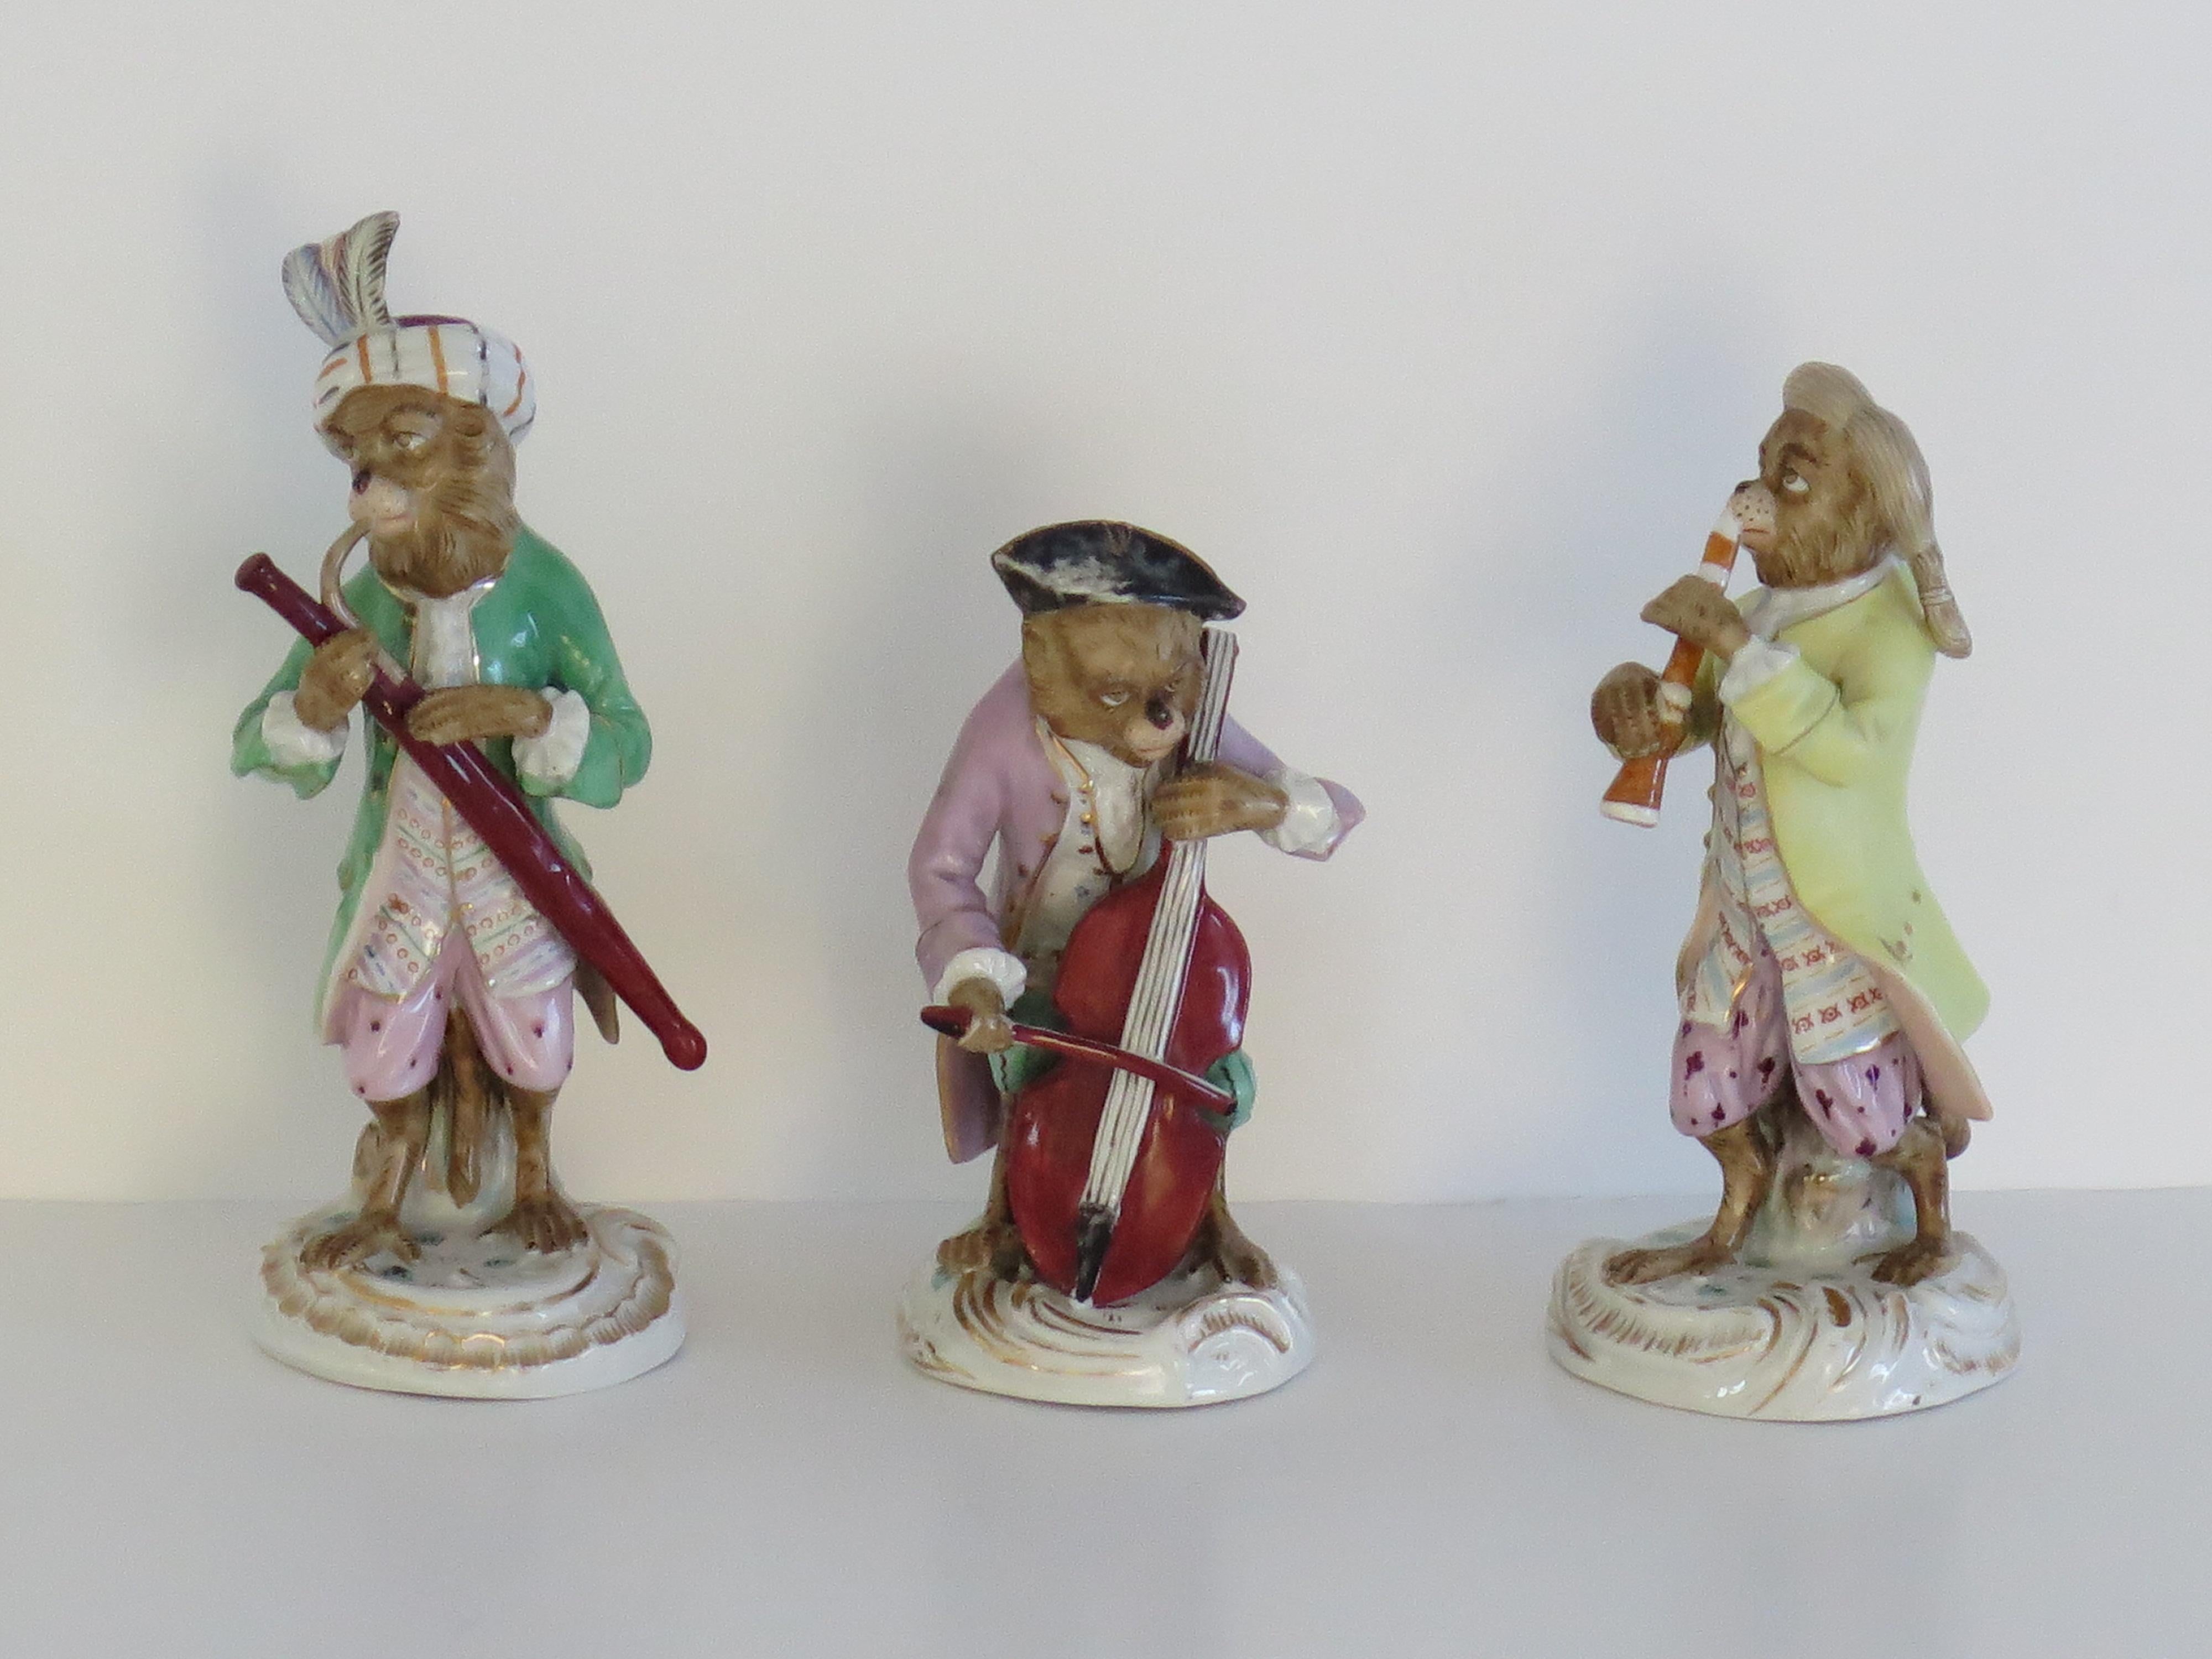 Monkey Figurine NINE-Piece Set Musical Band by Sitzendorf Porcelain, Circa 1910 In Good Condition For Sale In Lincoln, Lincolnshire